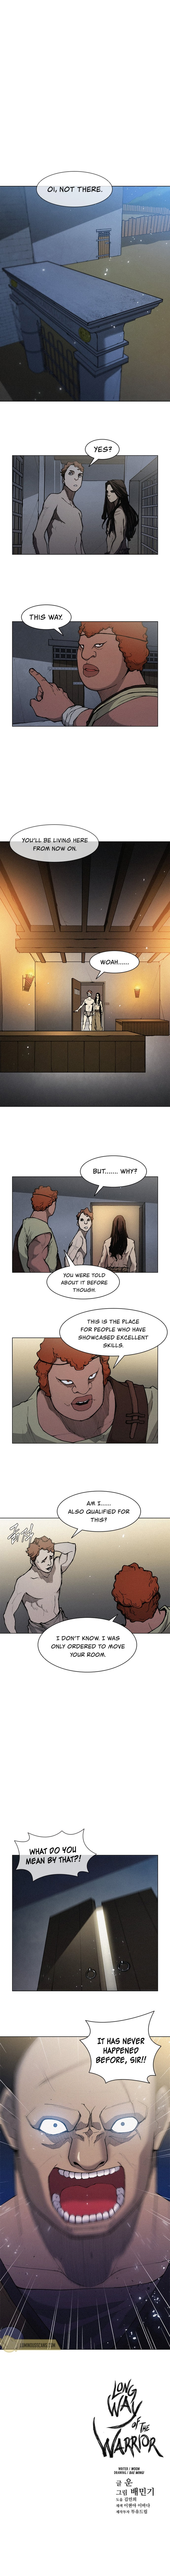 Long Way of the Warrior - Chapter 18 Page 8